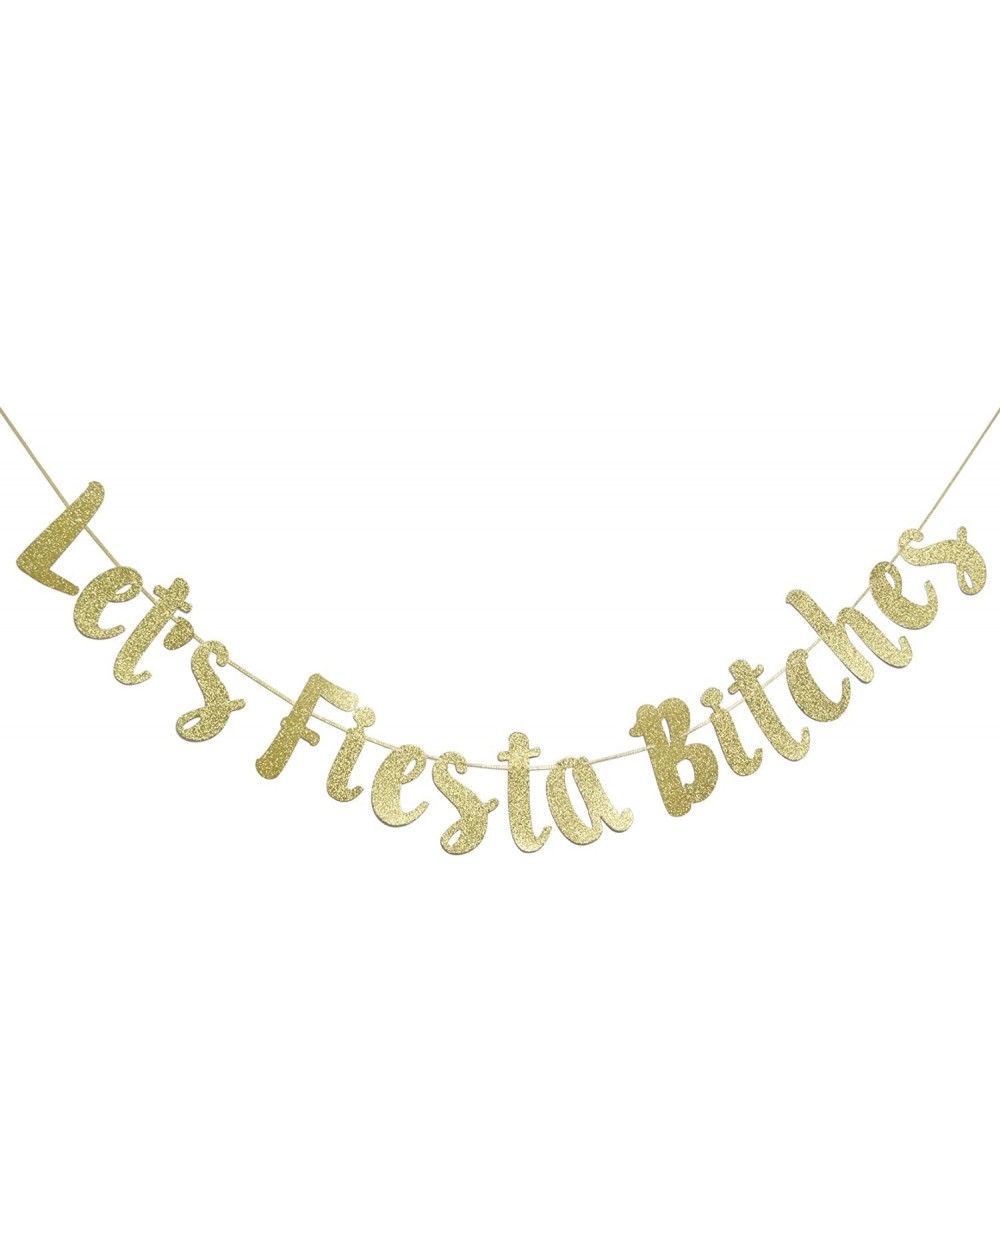 Banners & Garlands Let's Fiesta Bitches Banner Gold Glitter Cursive Banner- Mexican Fiesta Party- Bachelorette Party Decorati...